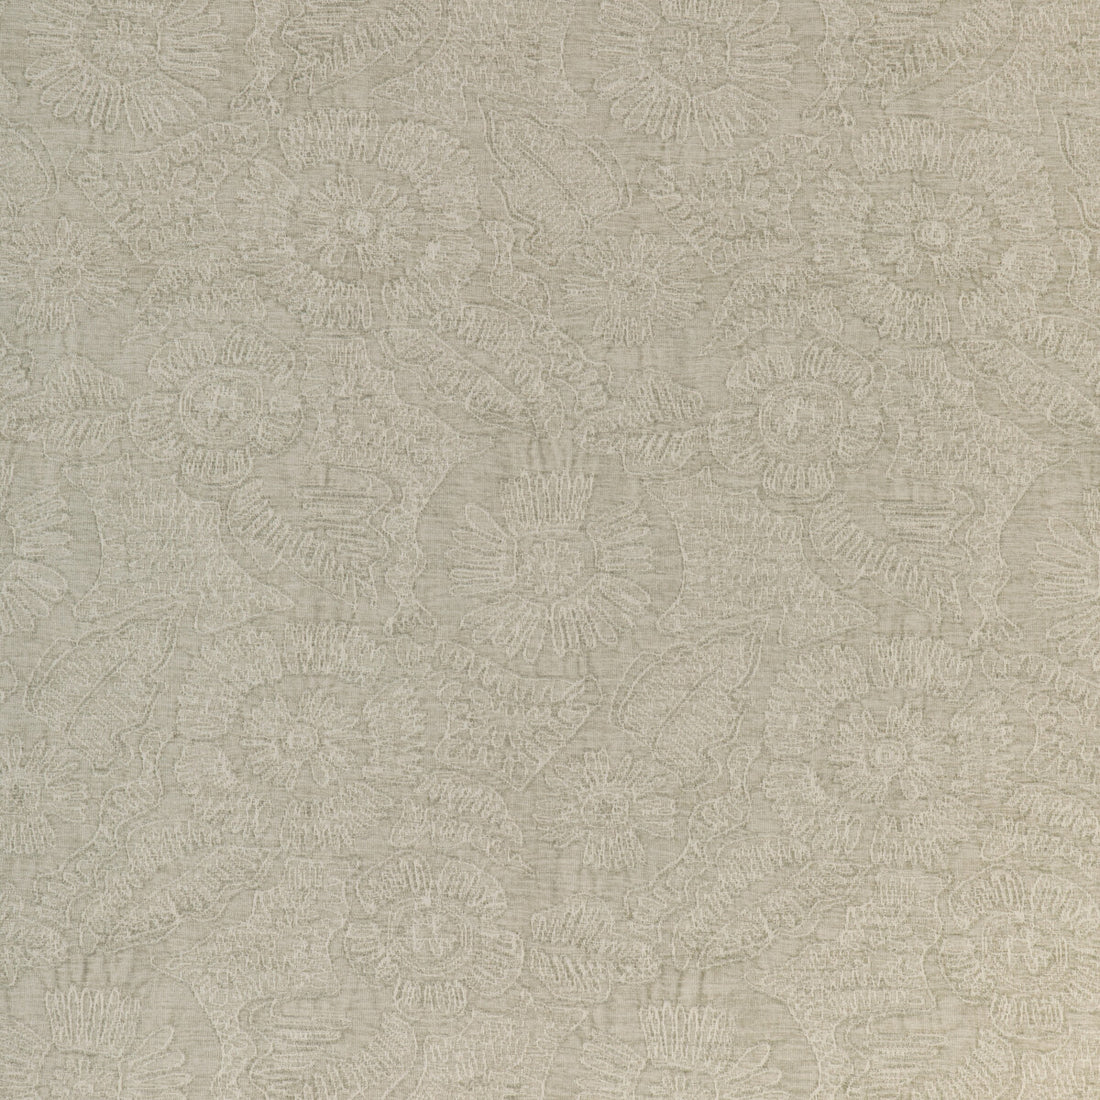 Chenille Bloom fabric in linen color - pattern 36889.16.0 - by Kravet Couture in the Atelier Weaves collection